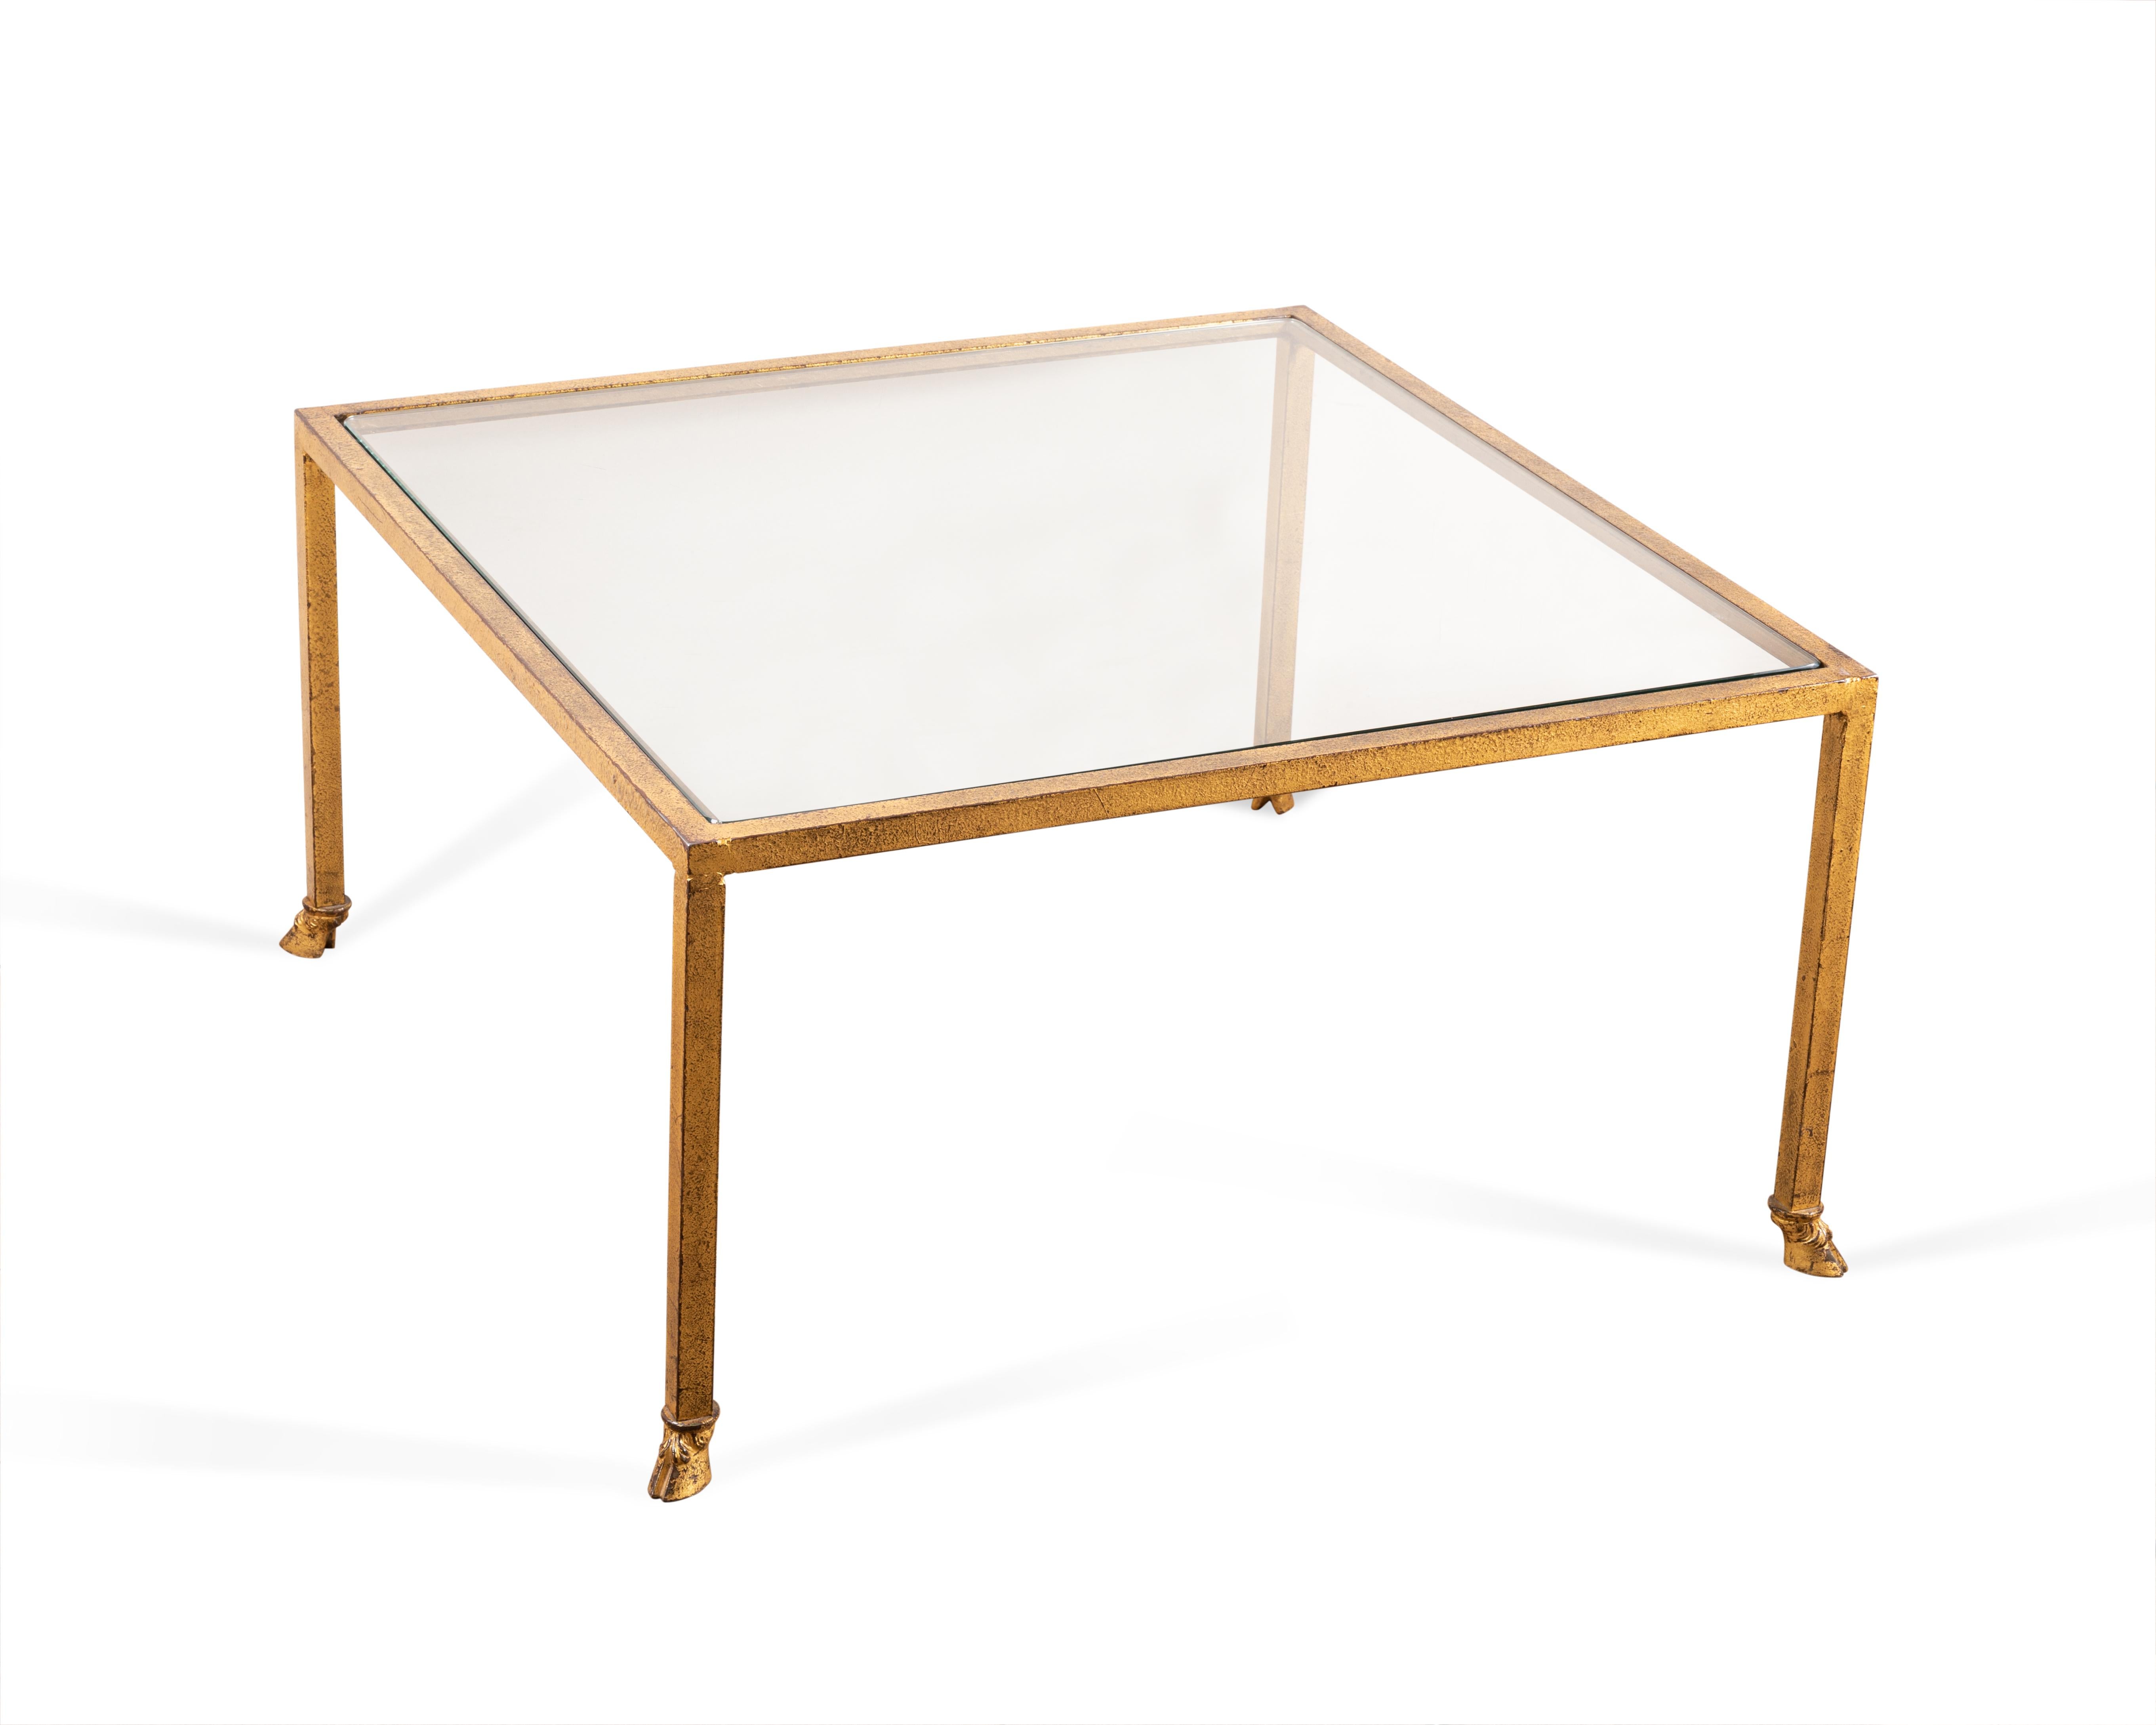 Square coffee table in gilded wrought iron.
Glass top. 
 by Maison Ramsay. 
France
1950

Maison Ramsay produced metal work in the 1950s and 60s, often retailed by Jansen. Ramsay's style is inspired by neoclassicism, as with this coffee table.